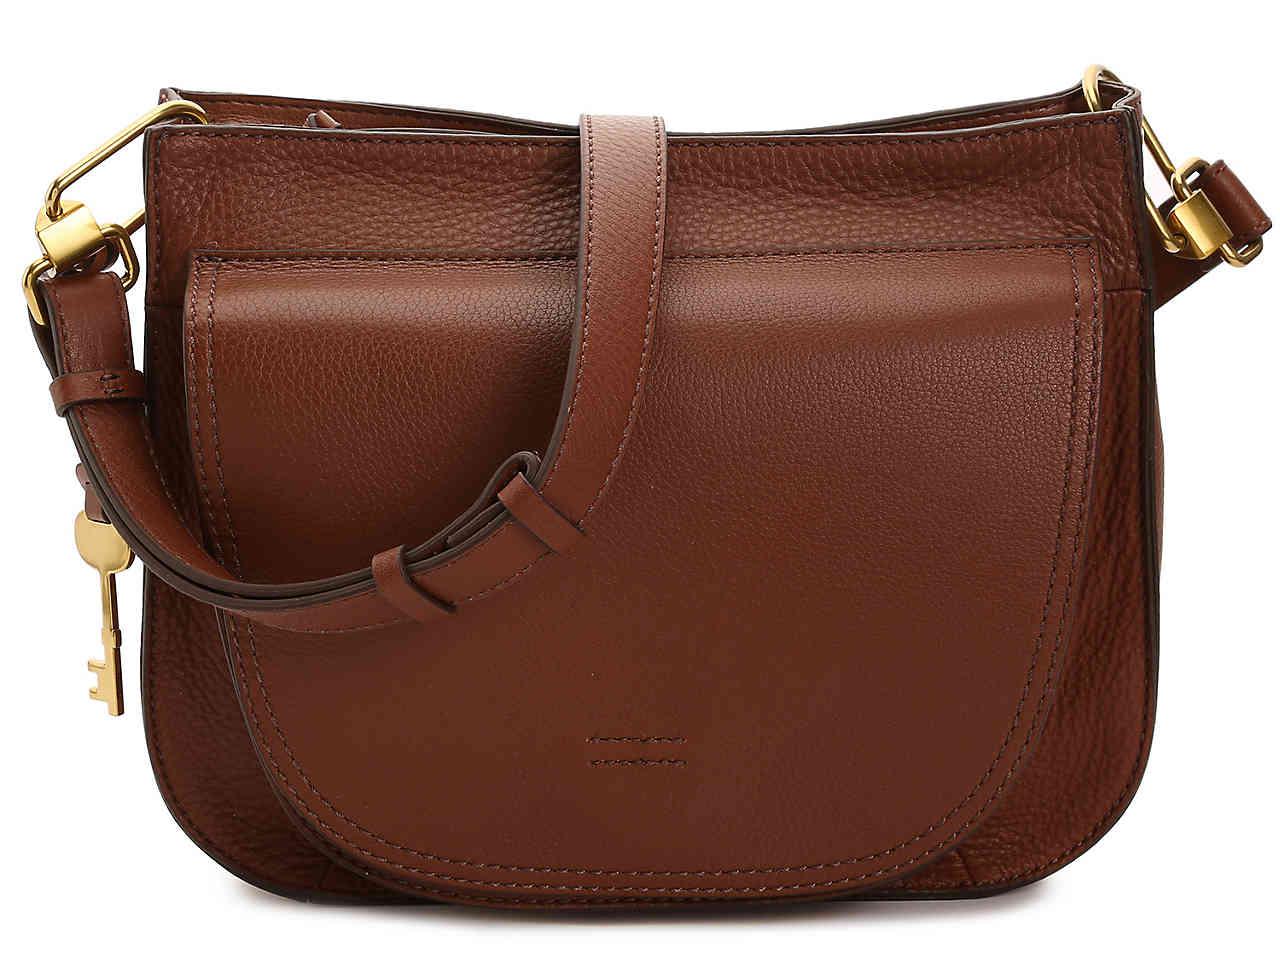 Fossil Camden Leather Crossbody Bag in Brown - Lyst